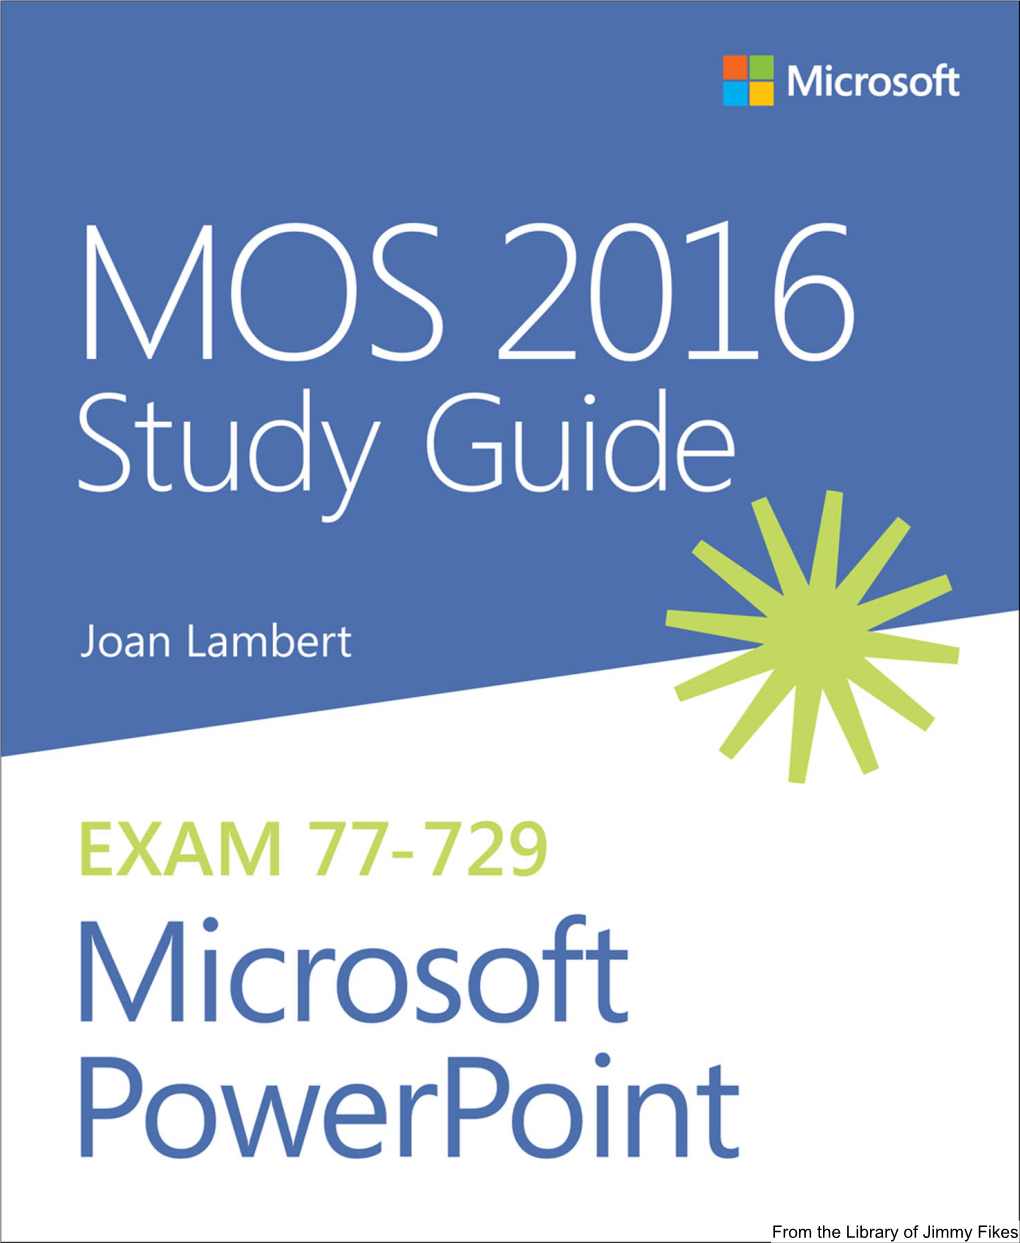 MOS 2016 Study Guide for Microsoft Powerpoint